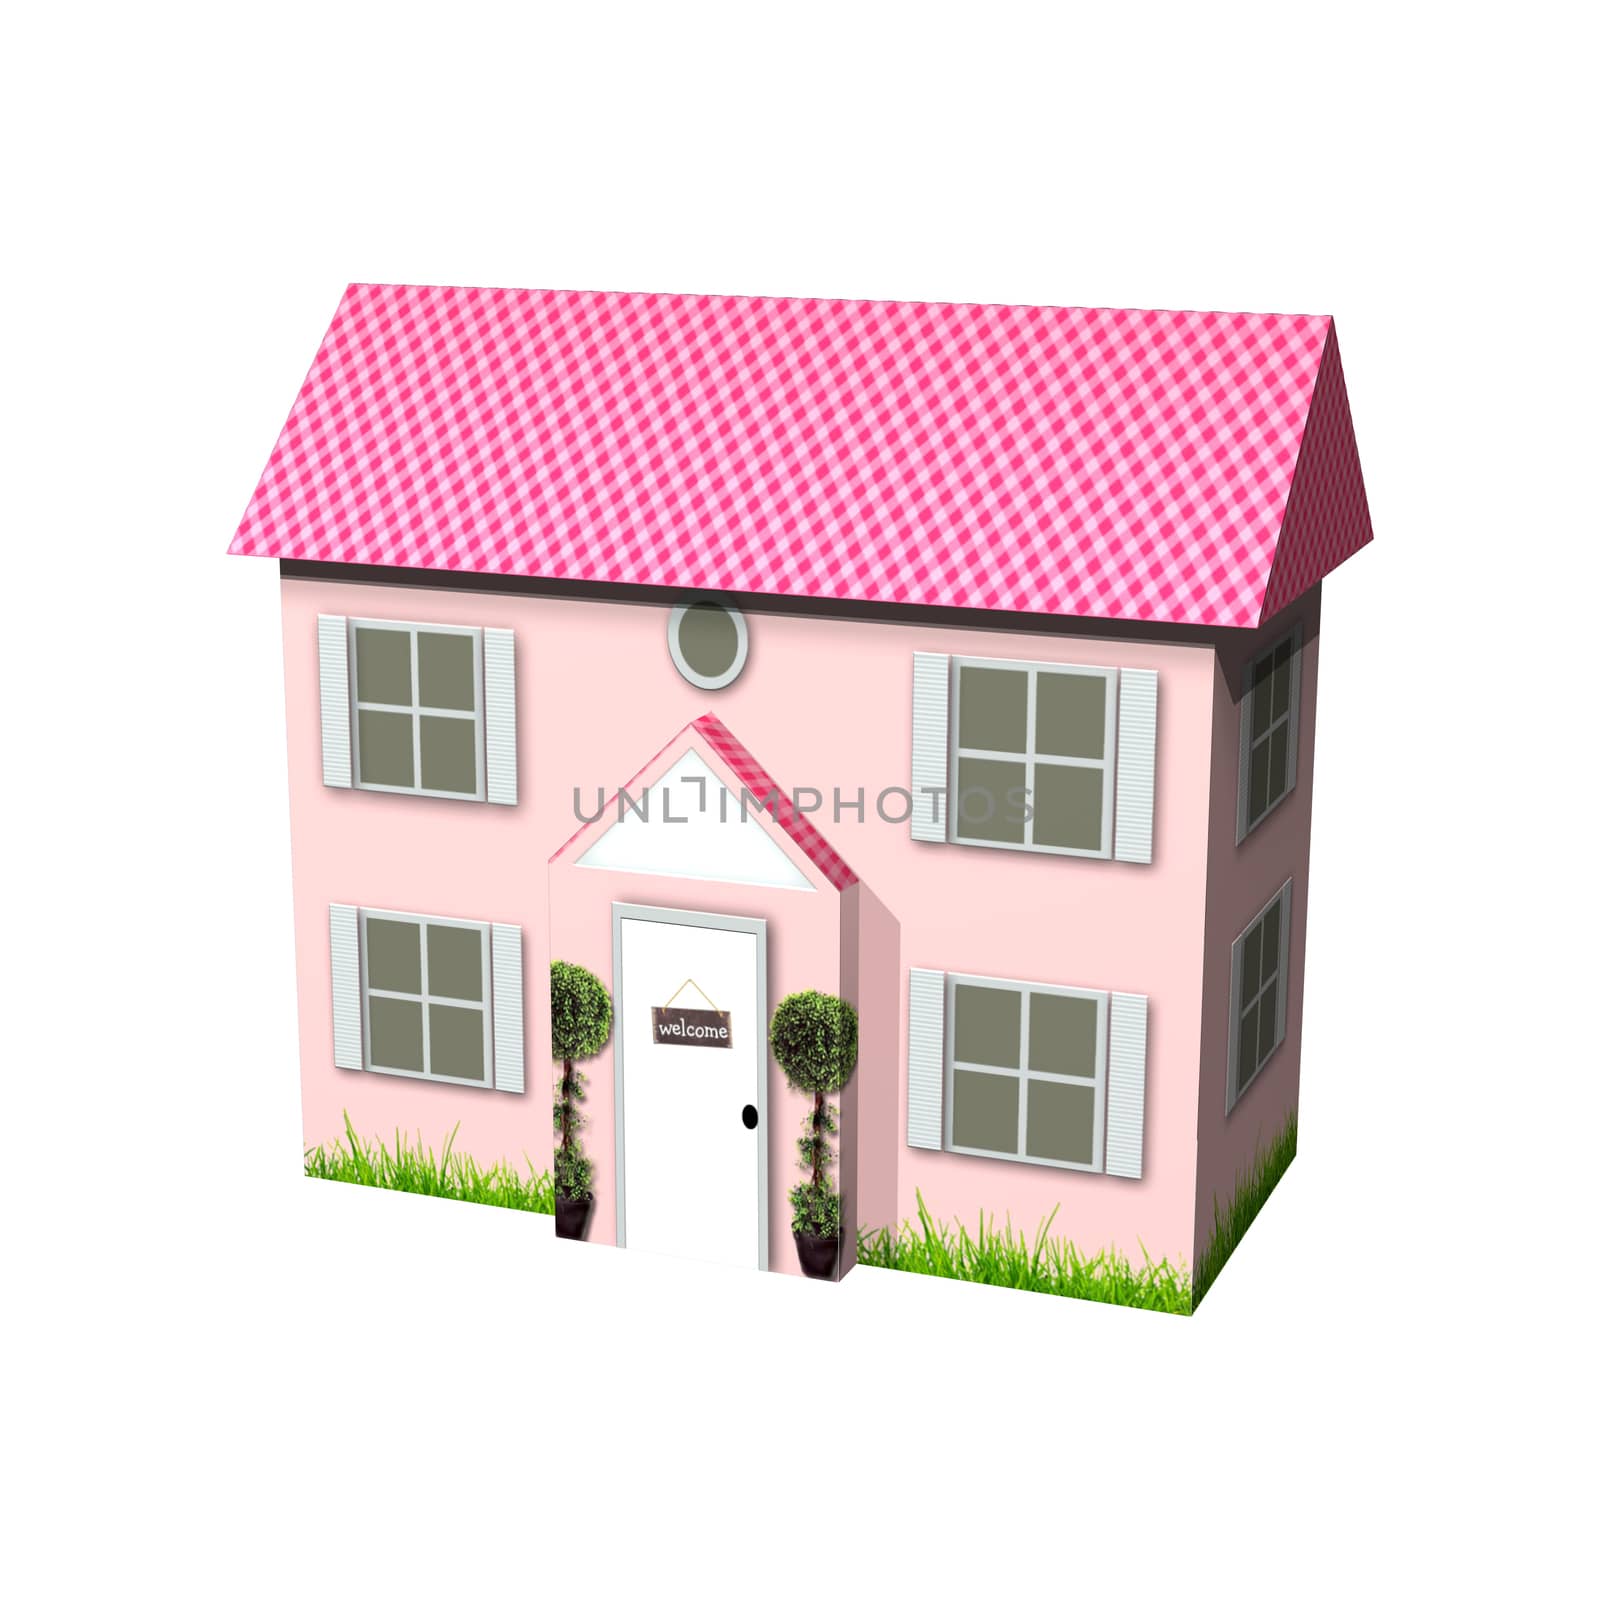 3D digital render of a cute pink cardboard house isolated on white background